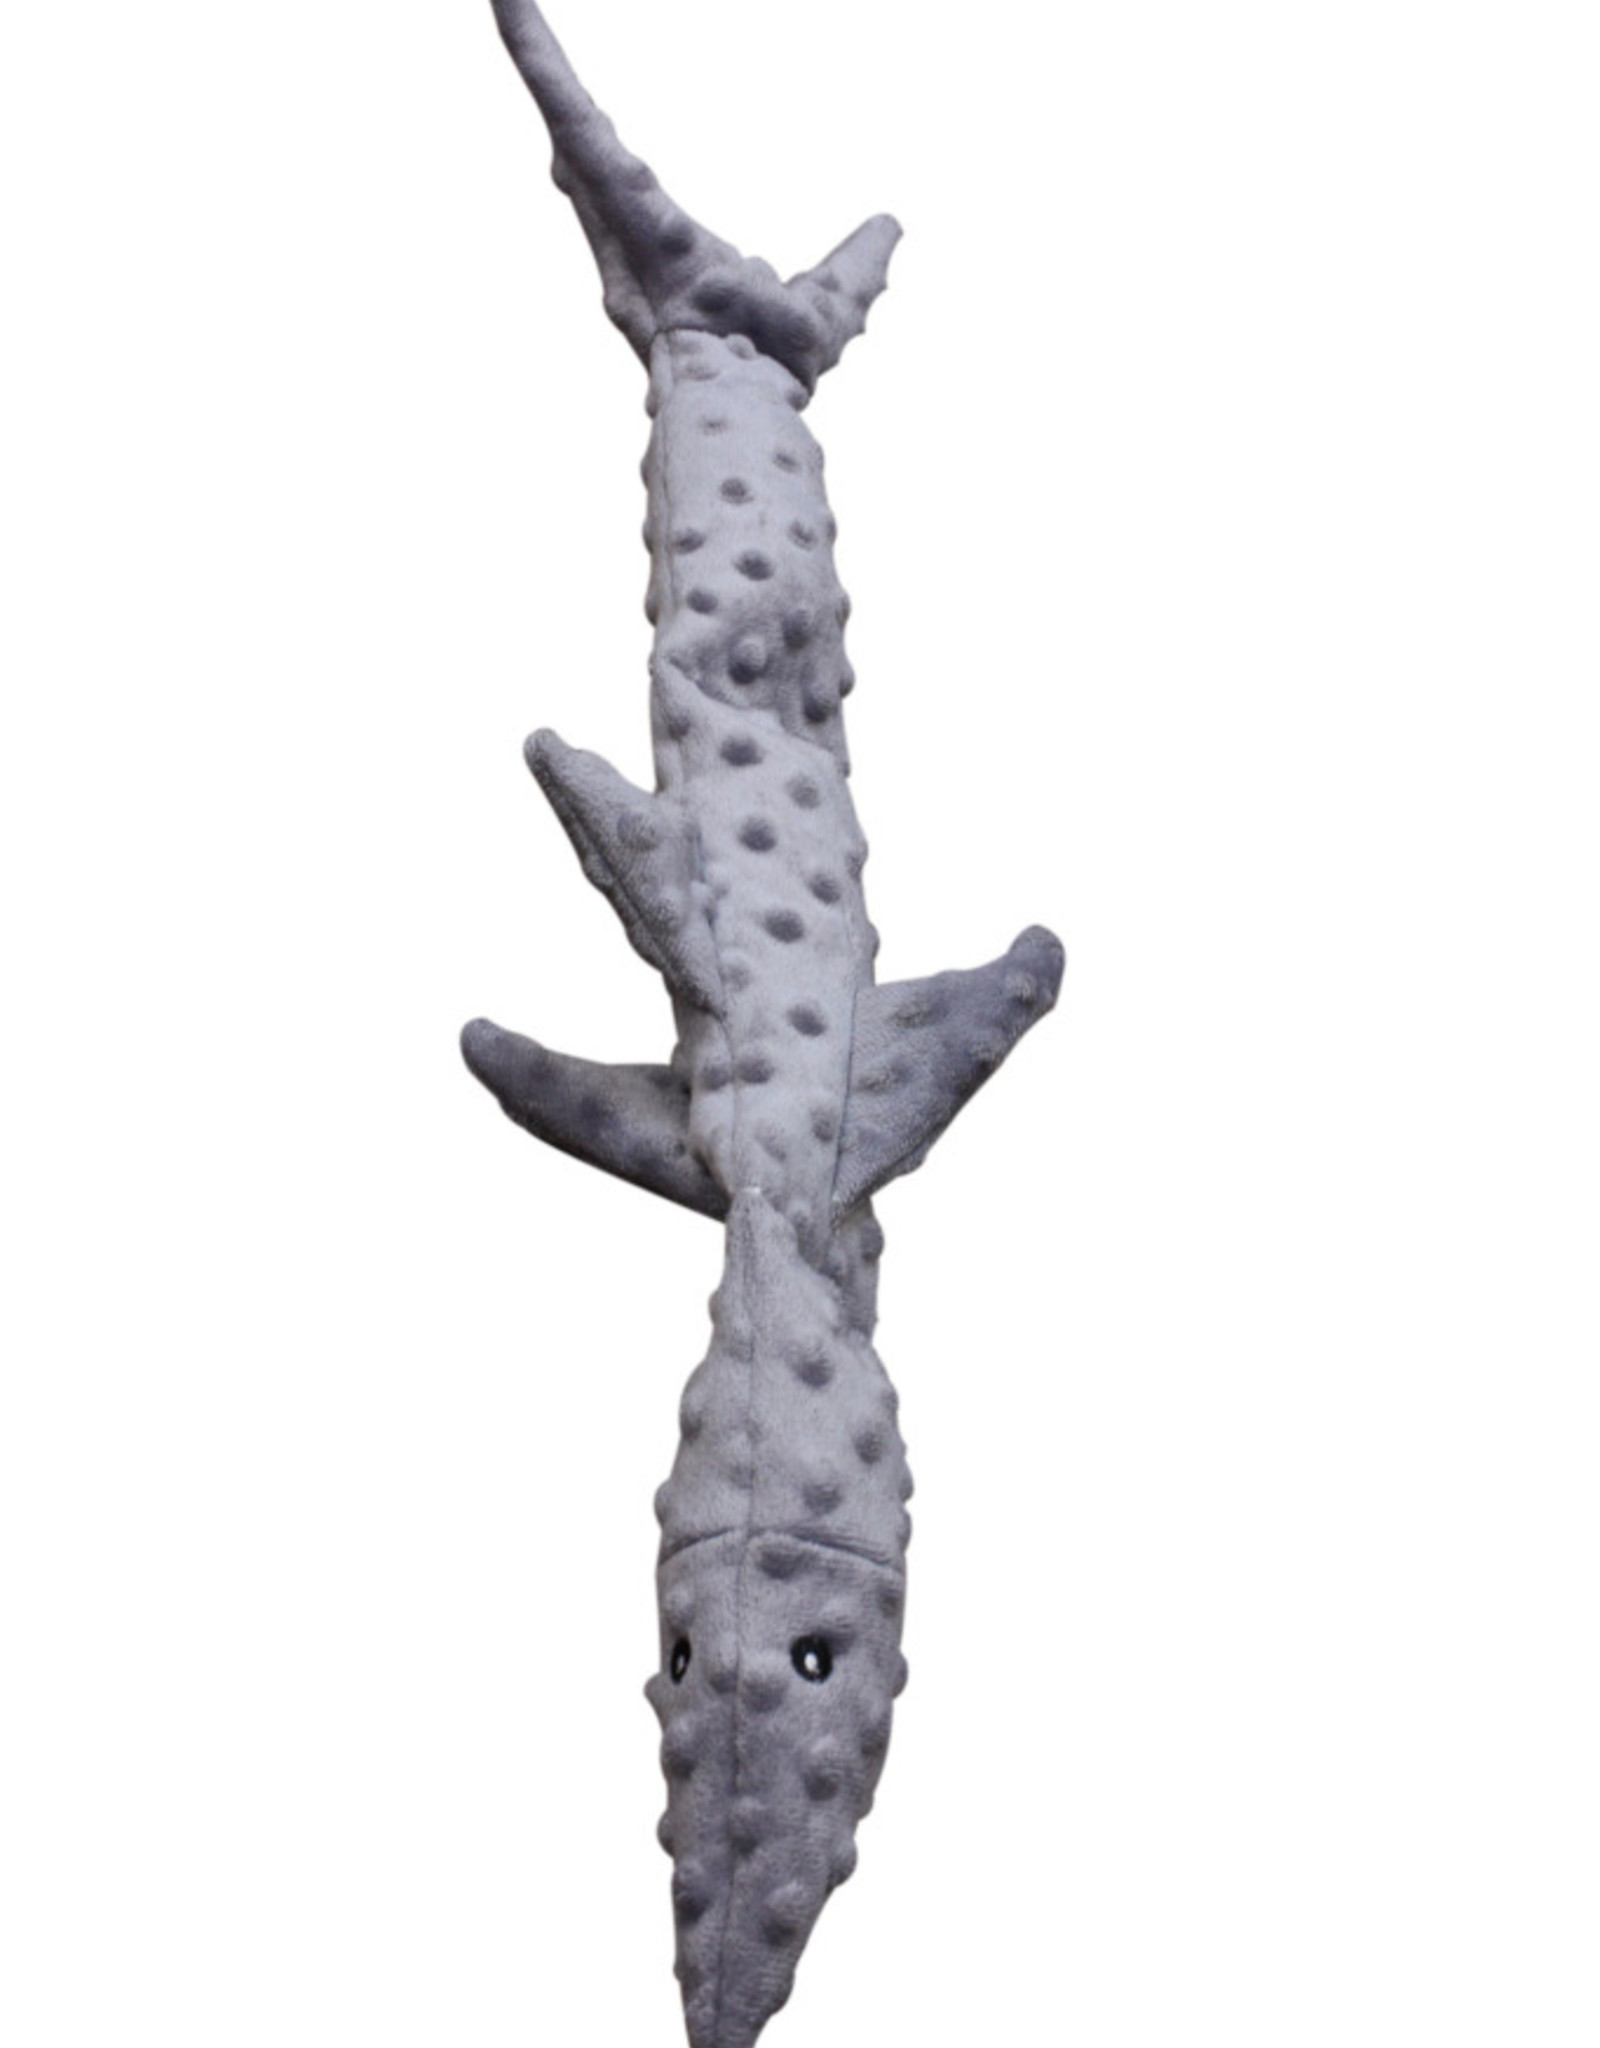 ETHICAL PRODUCTS, INC. SKINNEEEZ  EXTREME TRIPLE SQUEAK SHARK 25"